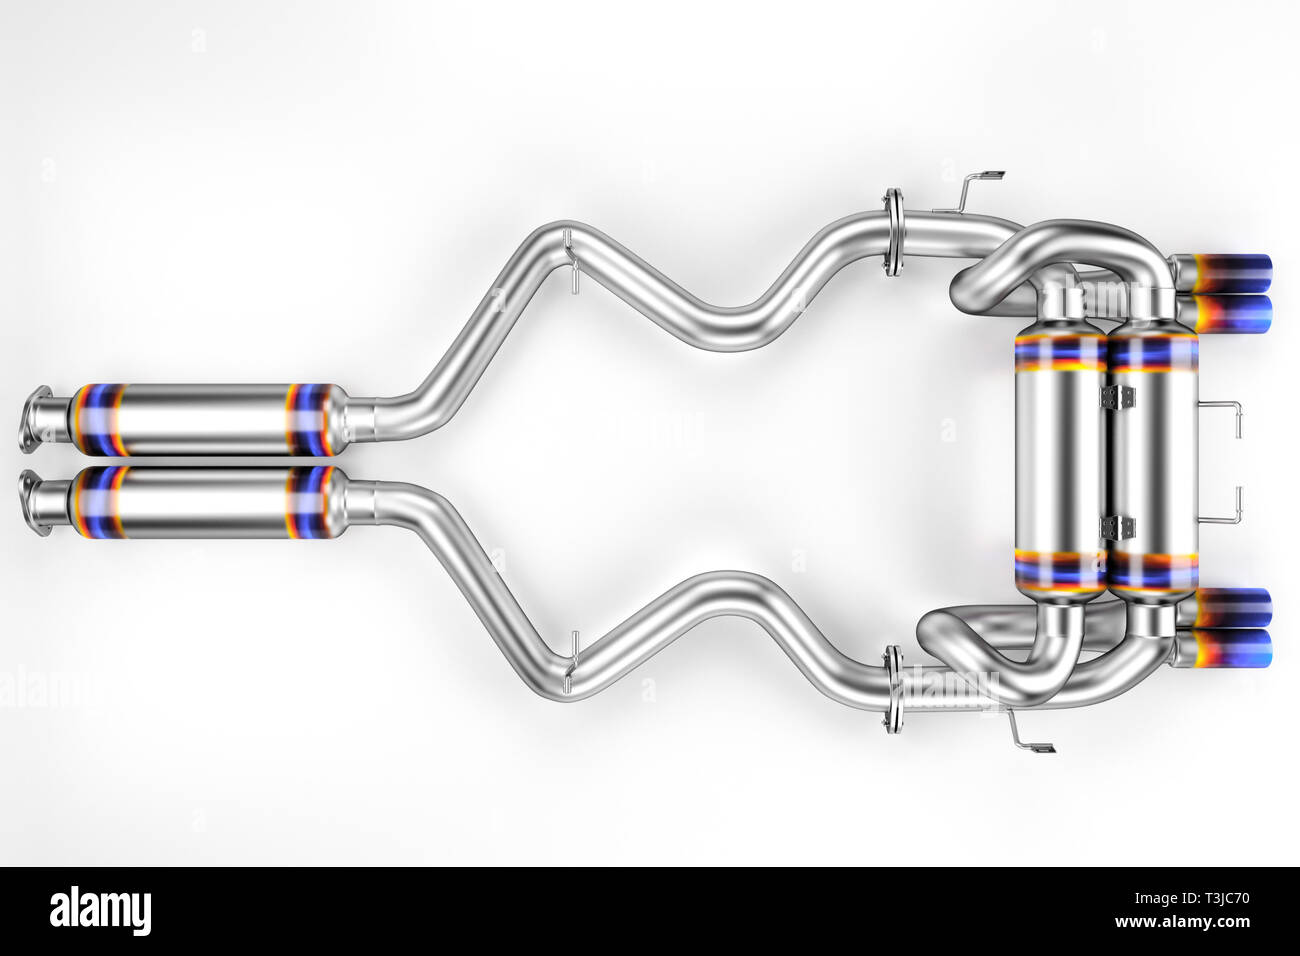 Tuning exhaust system for a sports car. Car muffler, exhaust silencer on a white background Stock Photo